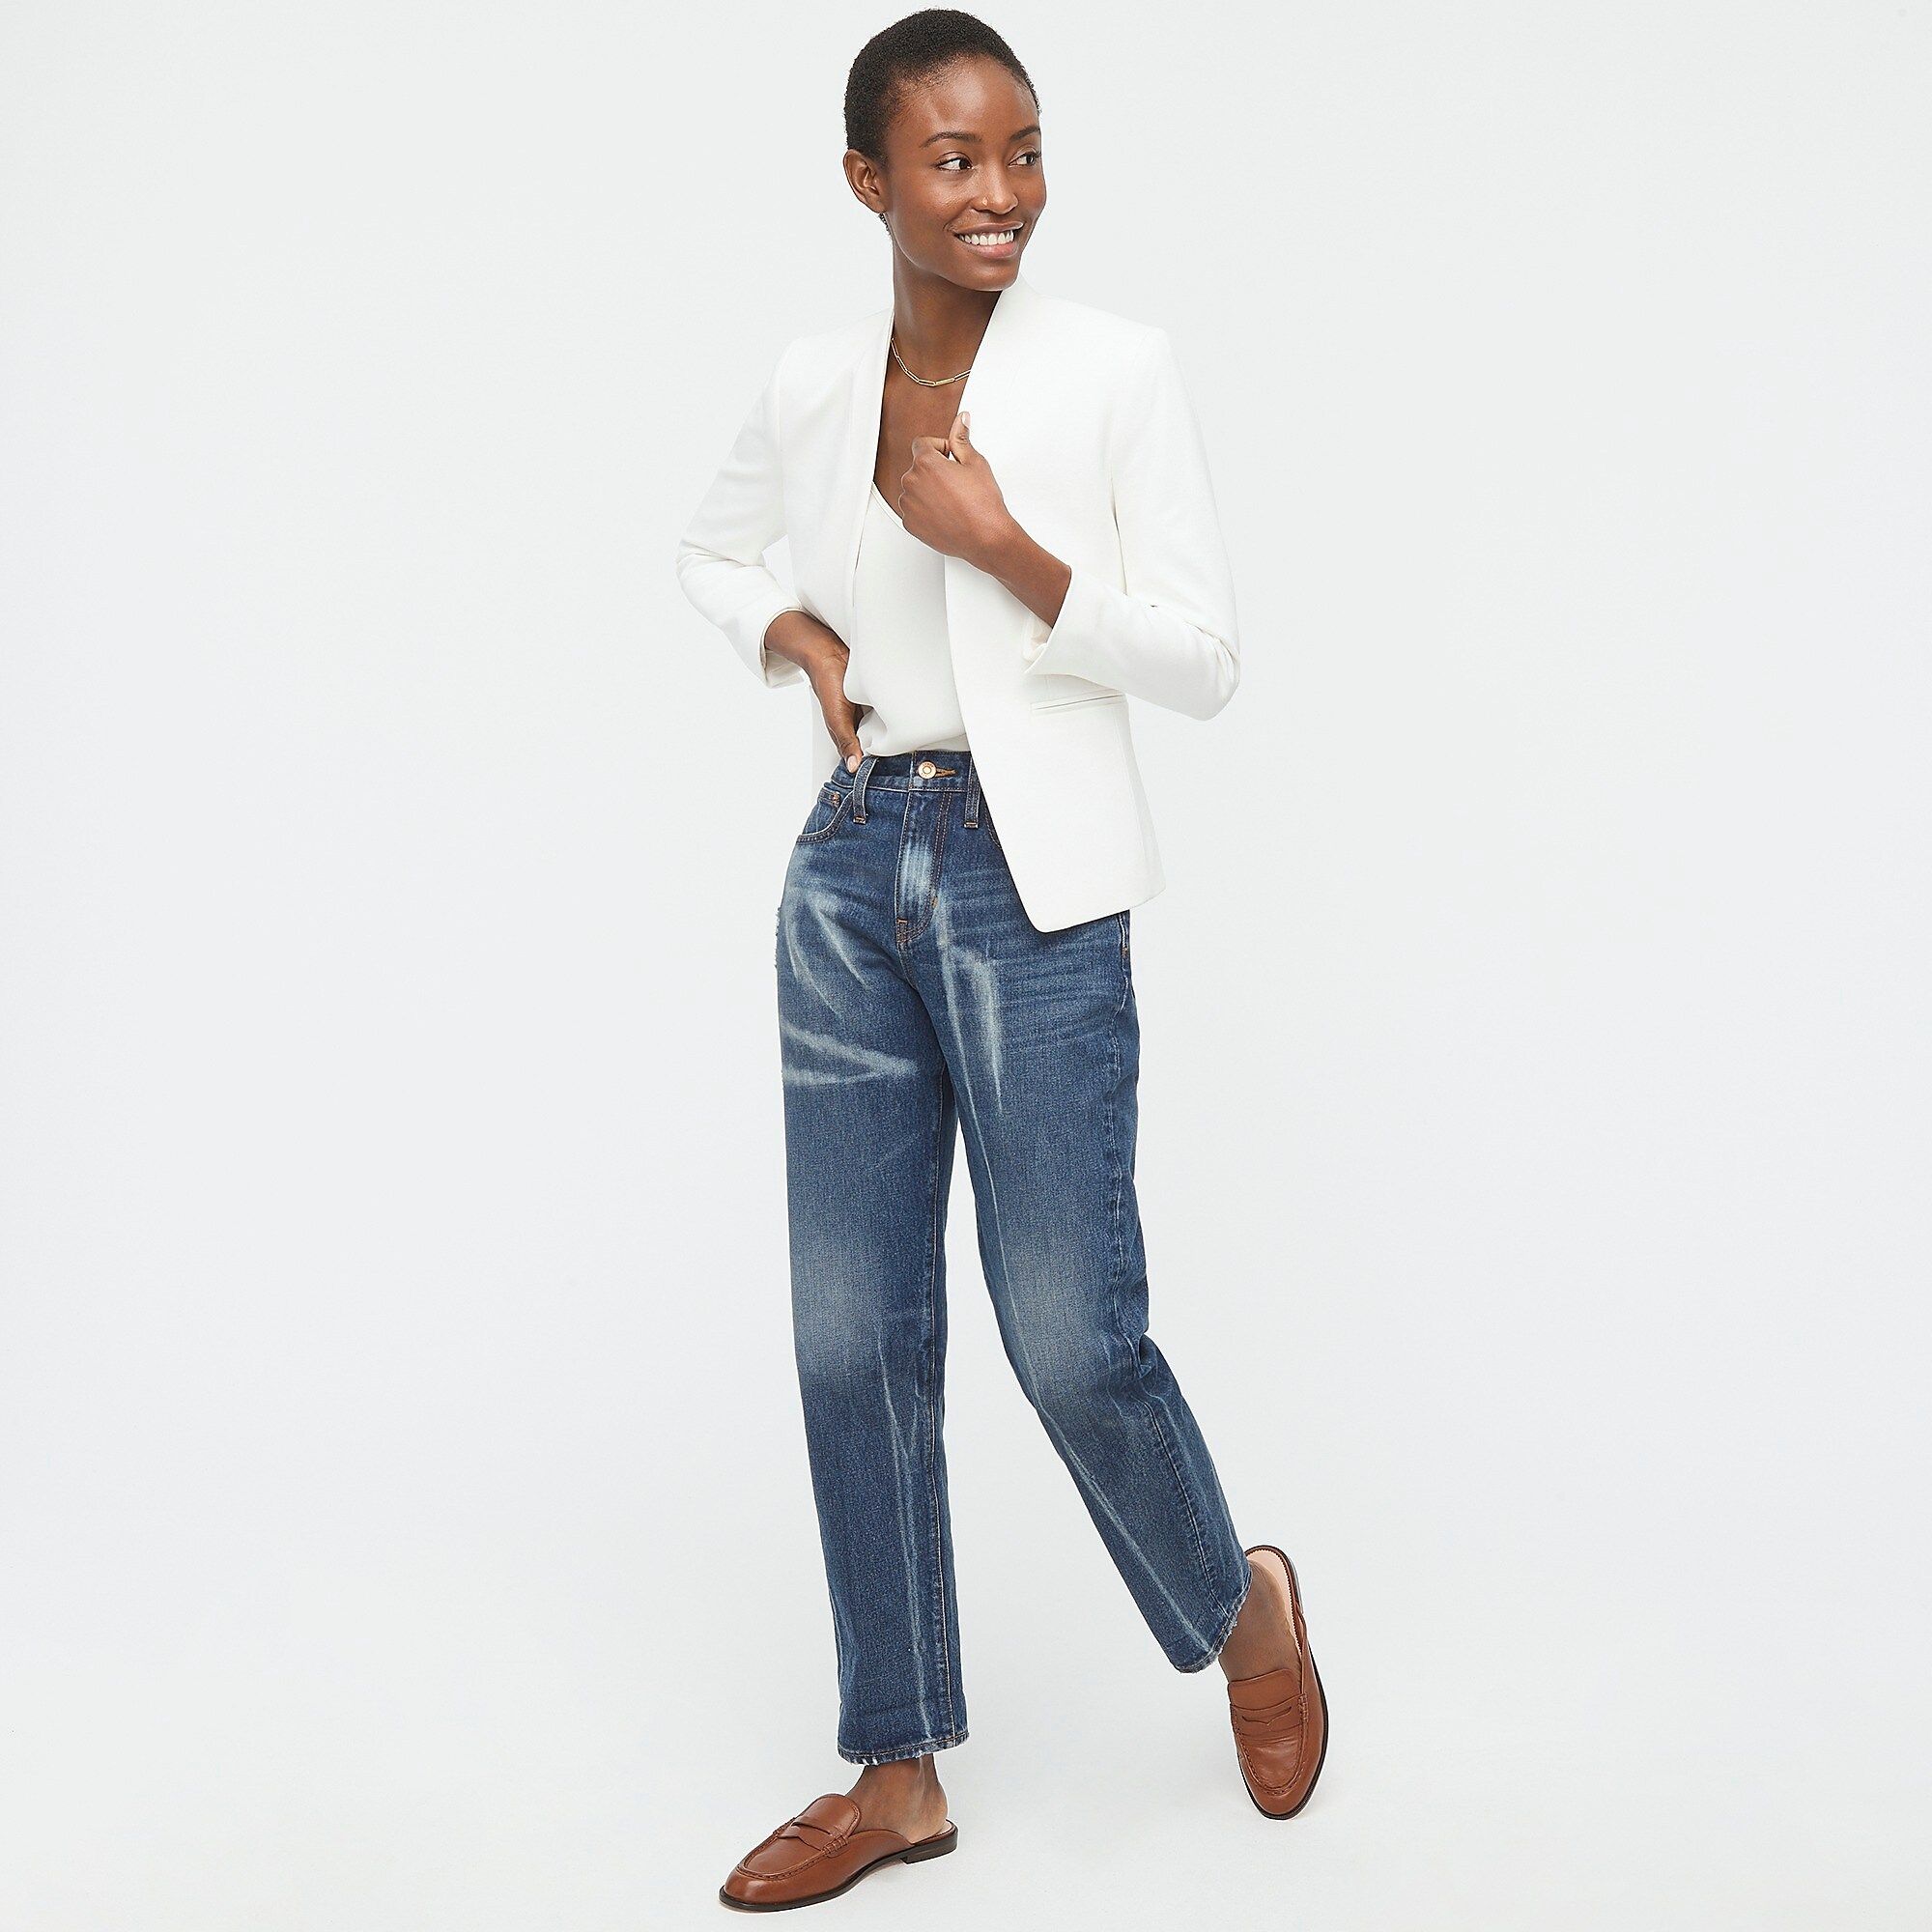 Going-out blazer in stretch twill | J.Crew US